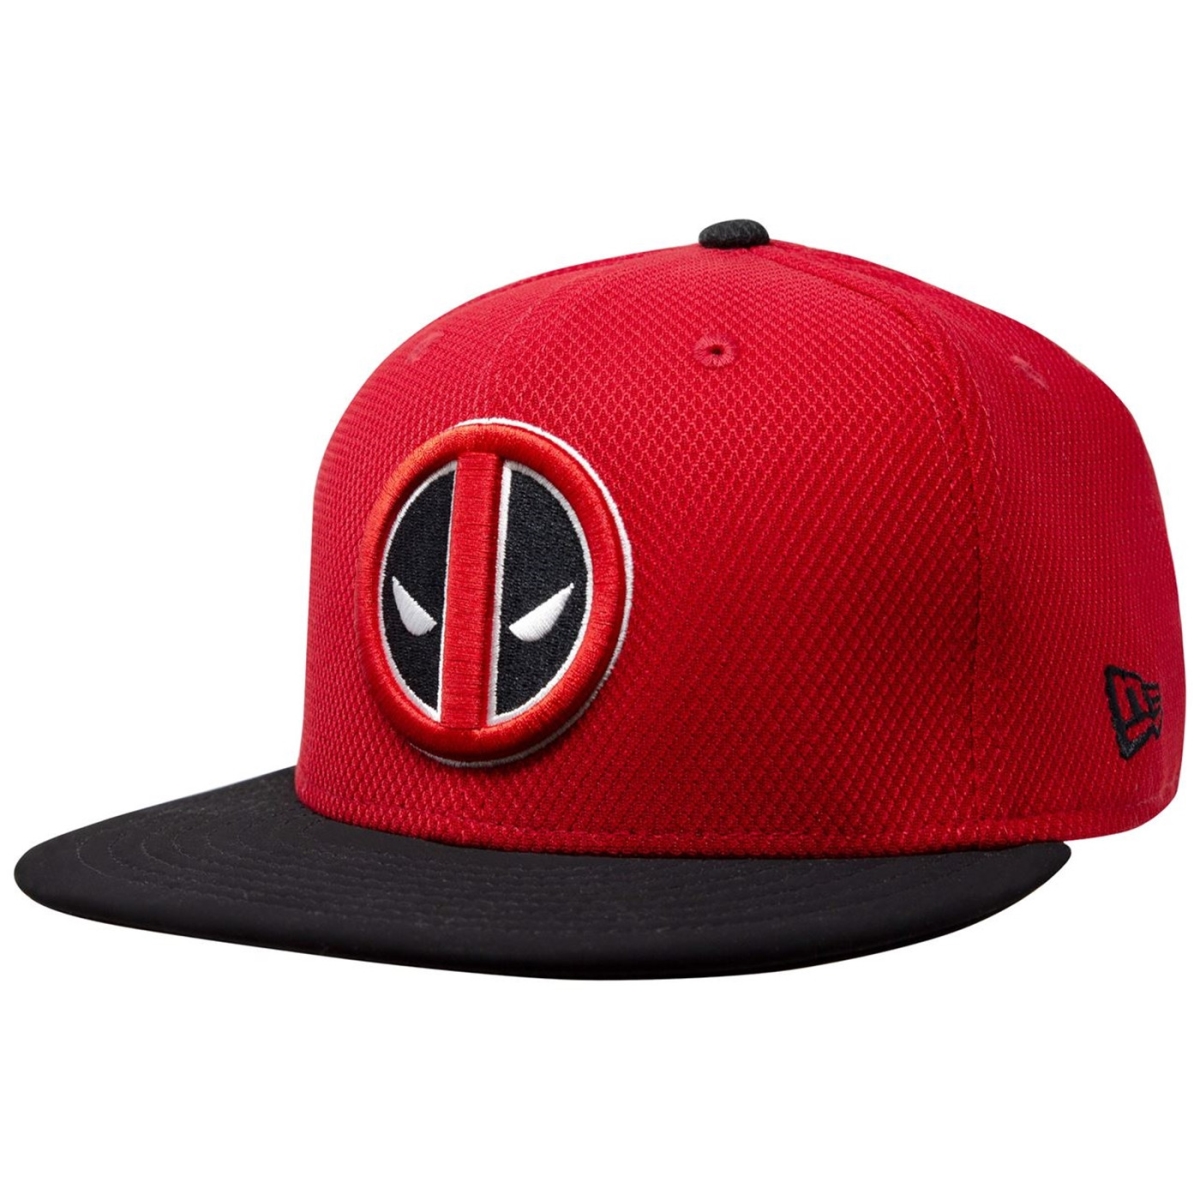 Picture of Deadpool hatdpsymrb5950-738-7 3-8 Fitted Deadpool Symbol Red & Black 59Fifty Fitted Hat - Size 7.375